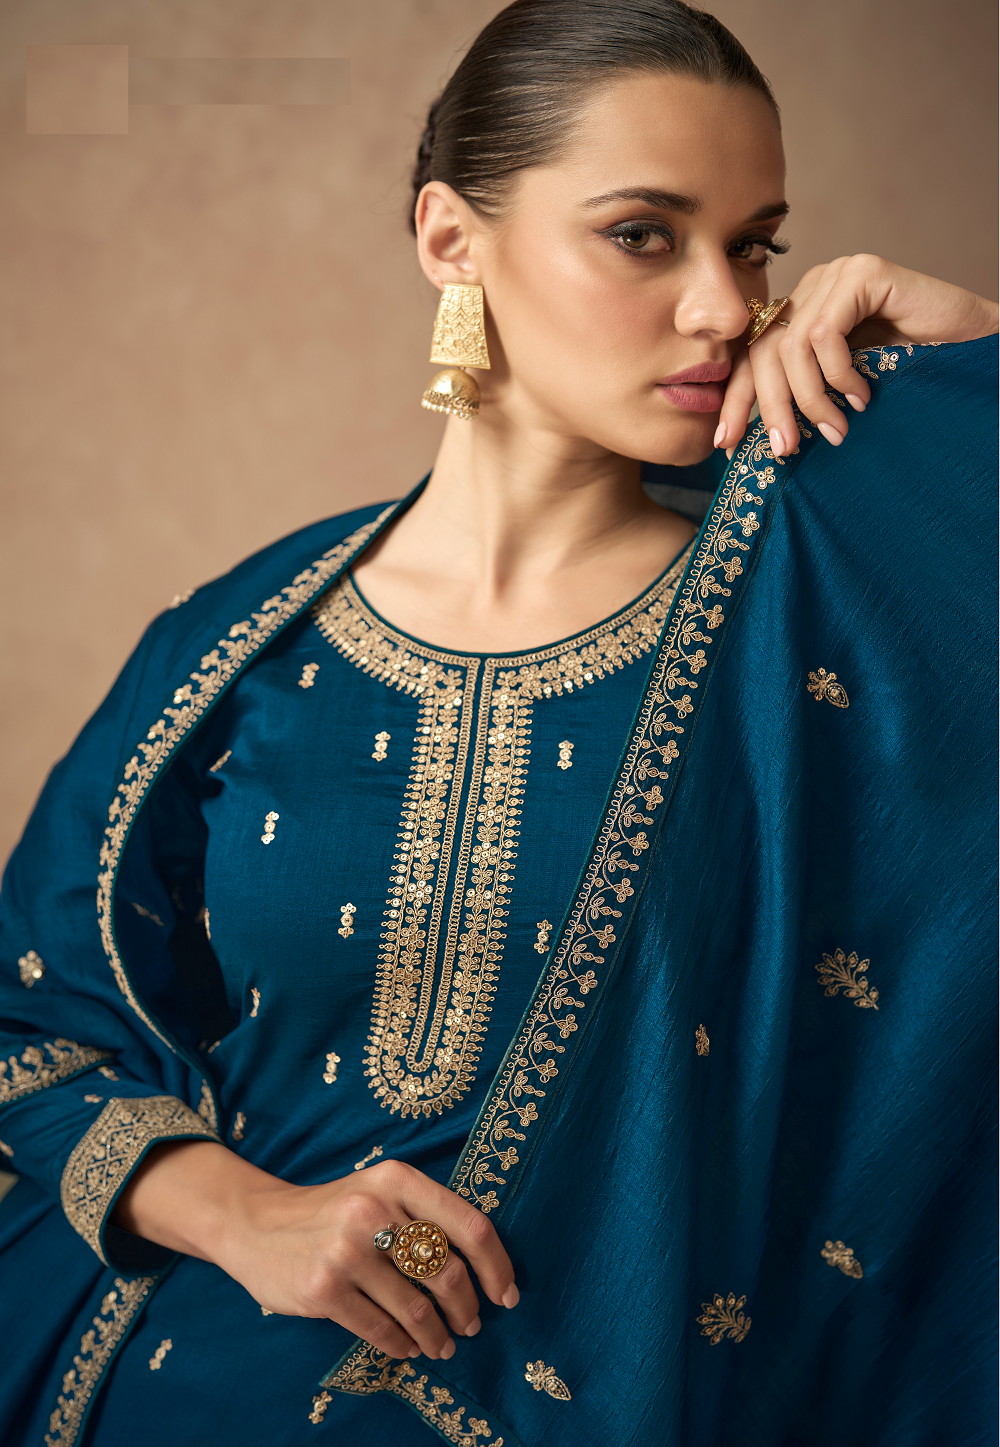 Art Silk Embroidered Pakistani Suit in Teal Blue